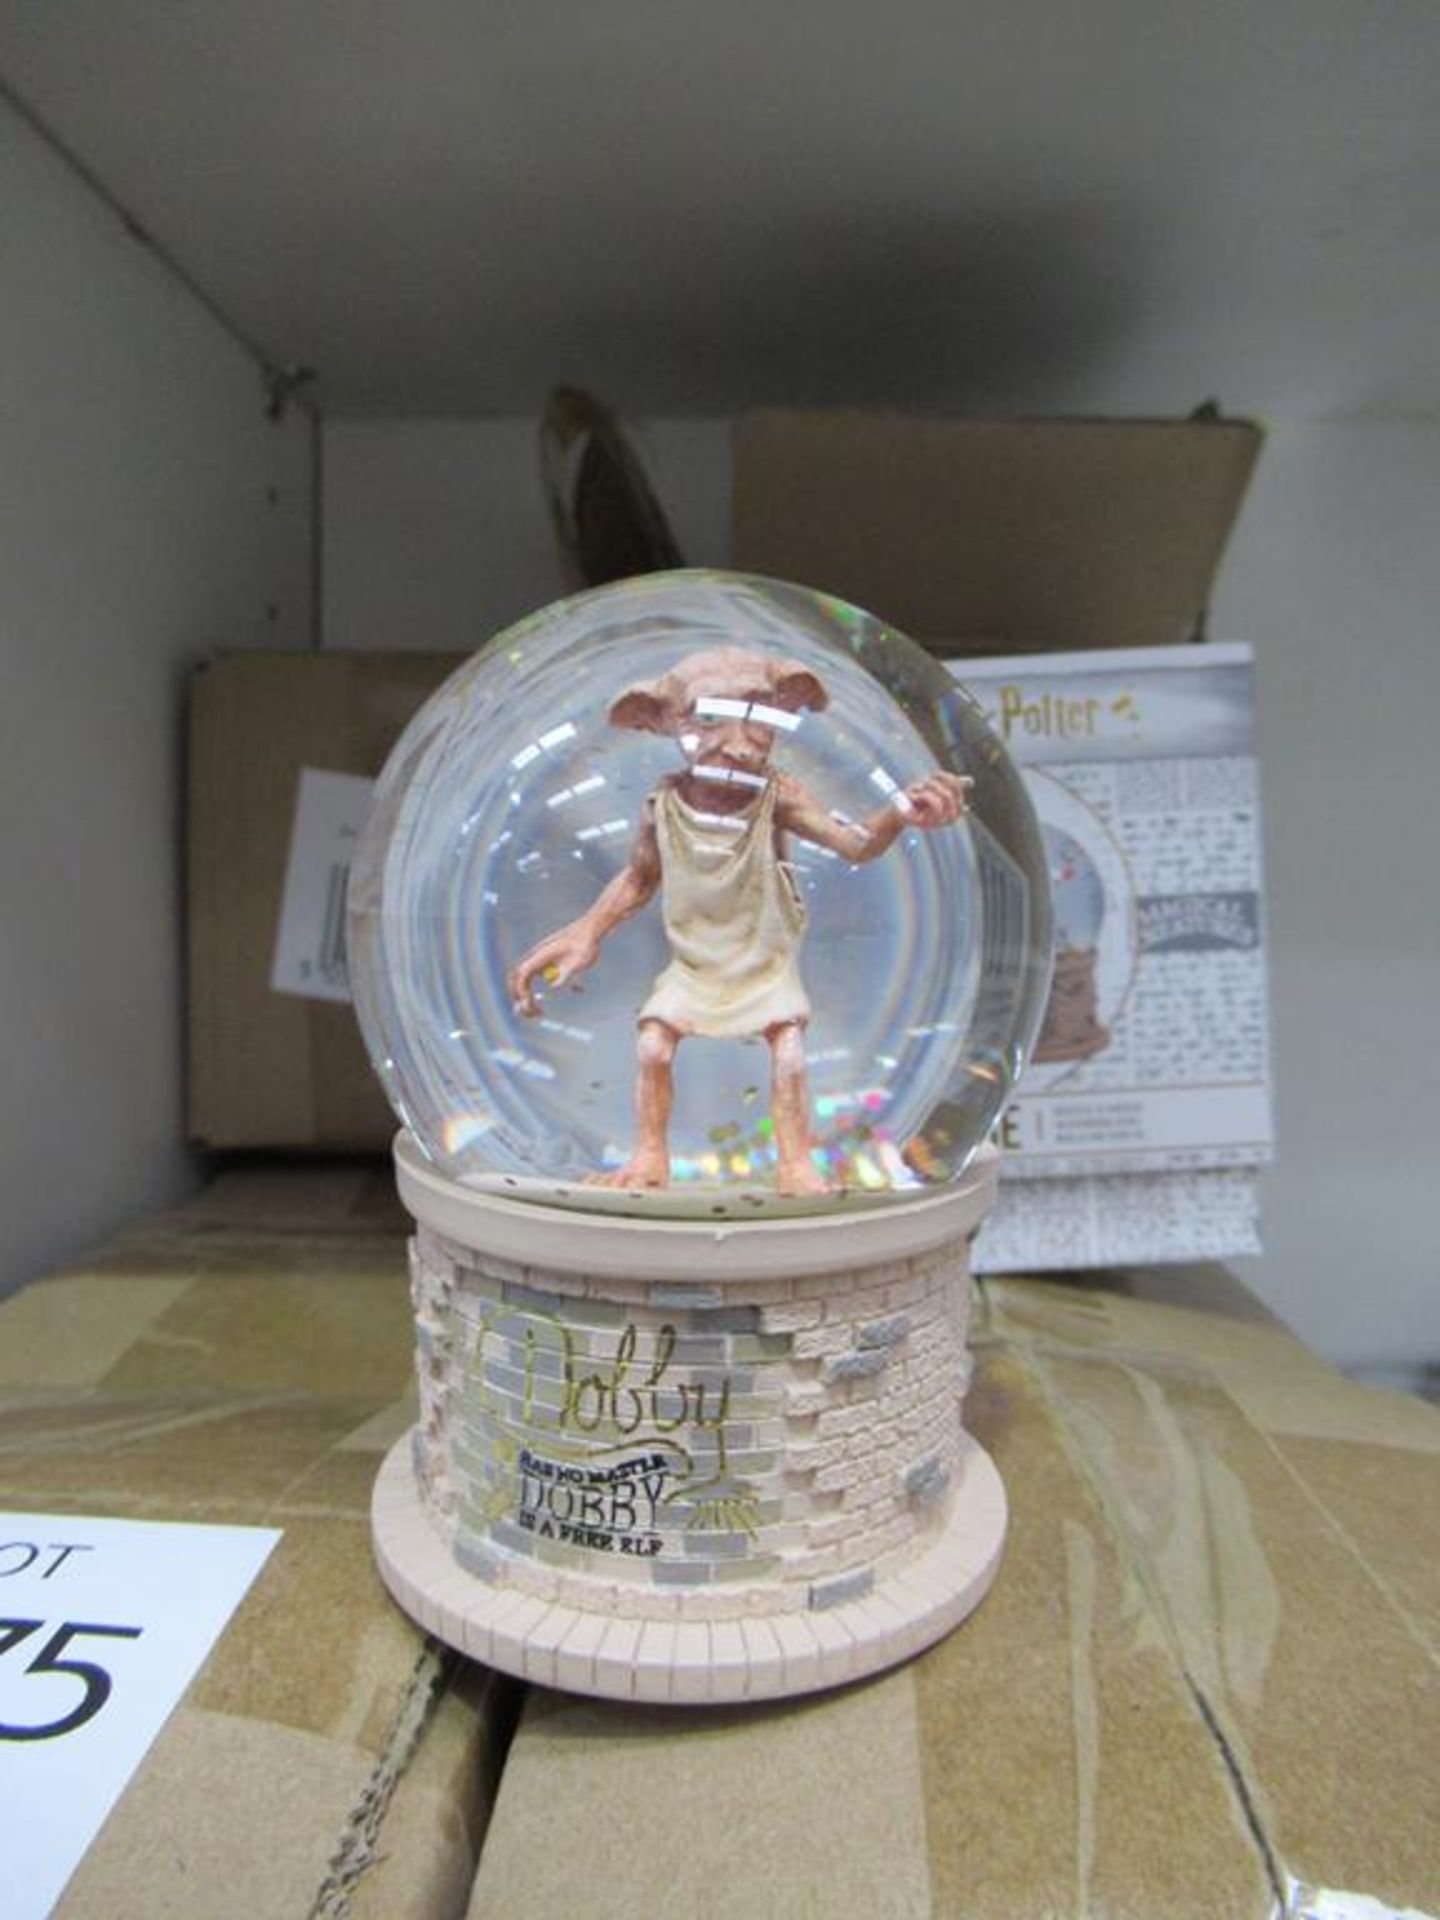 8x Harry Potter Themed Snow Globes - Image 3 of 3